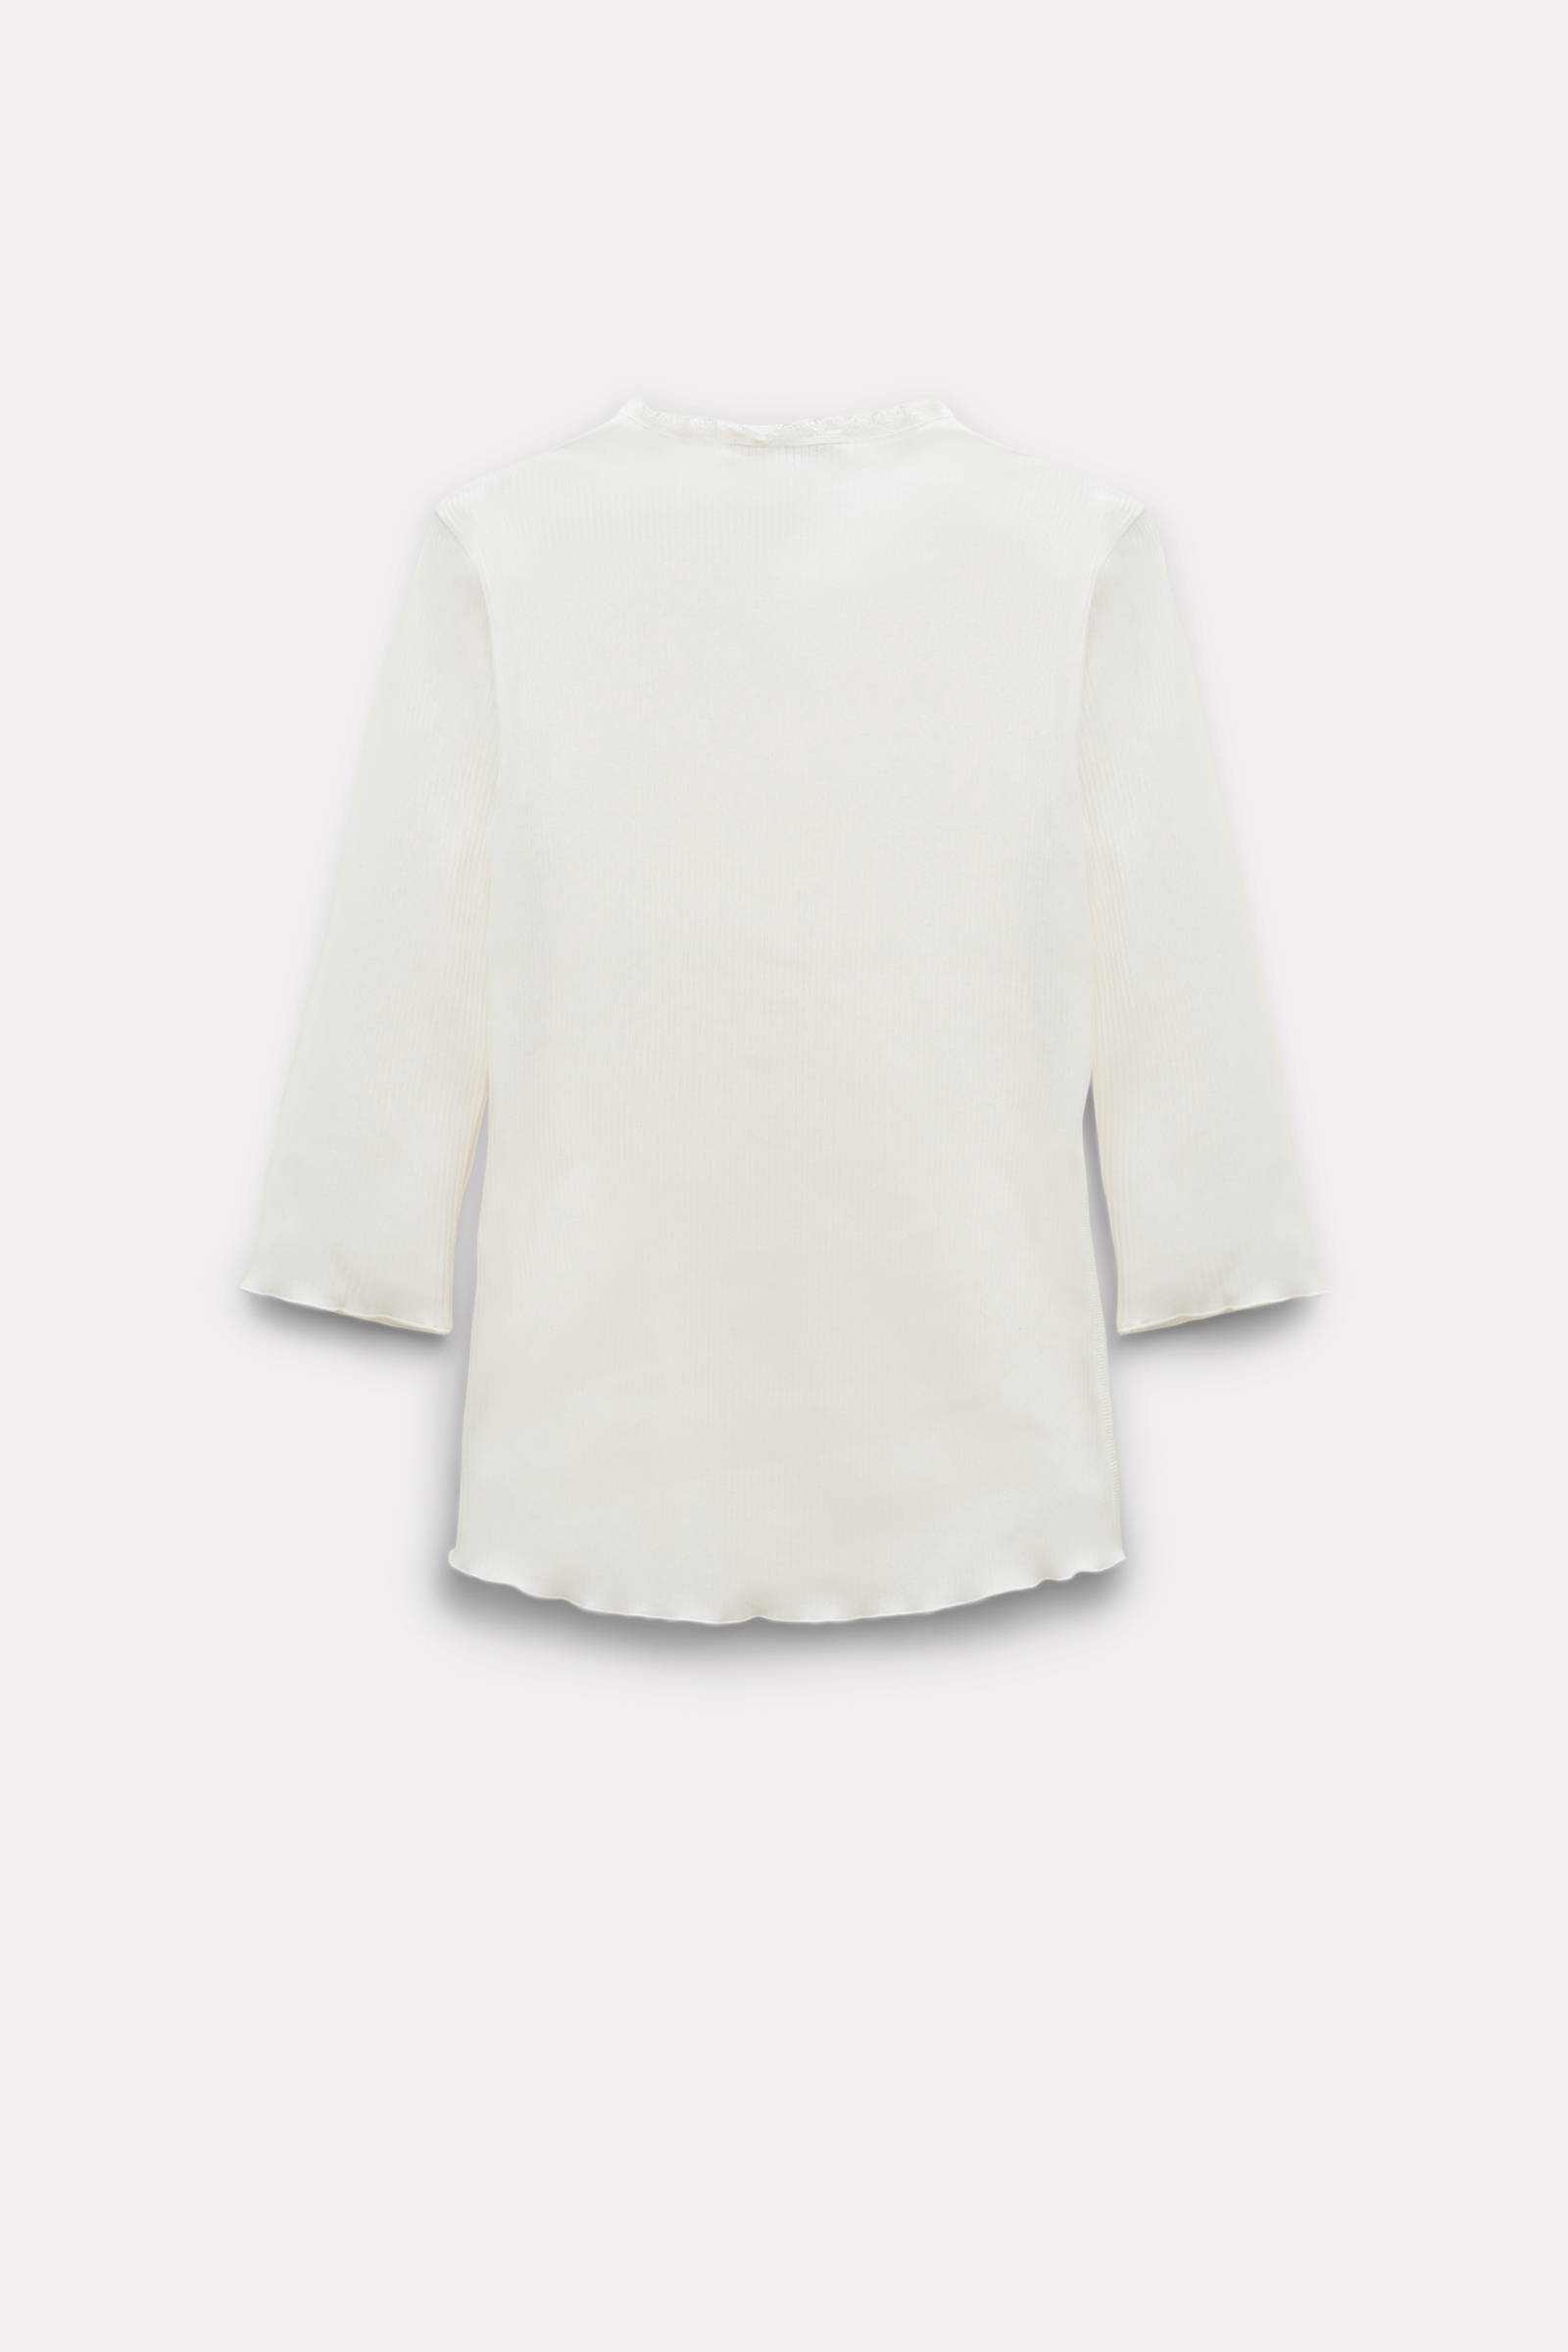 Dorothee Schumacher Ribbed cotton Popover with lace trim camellia white